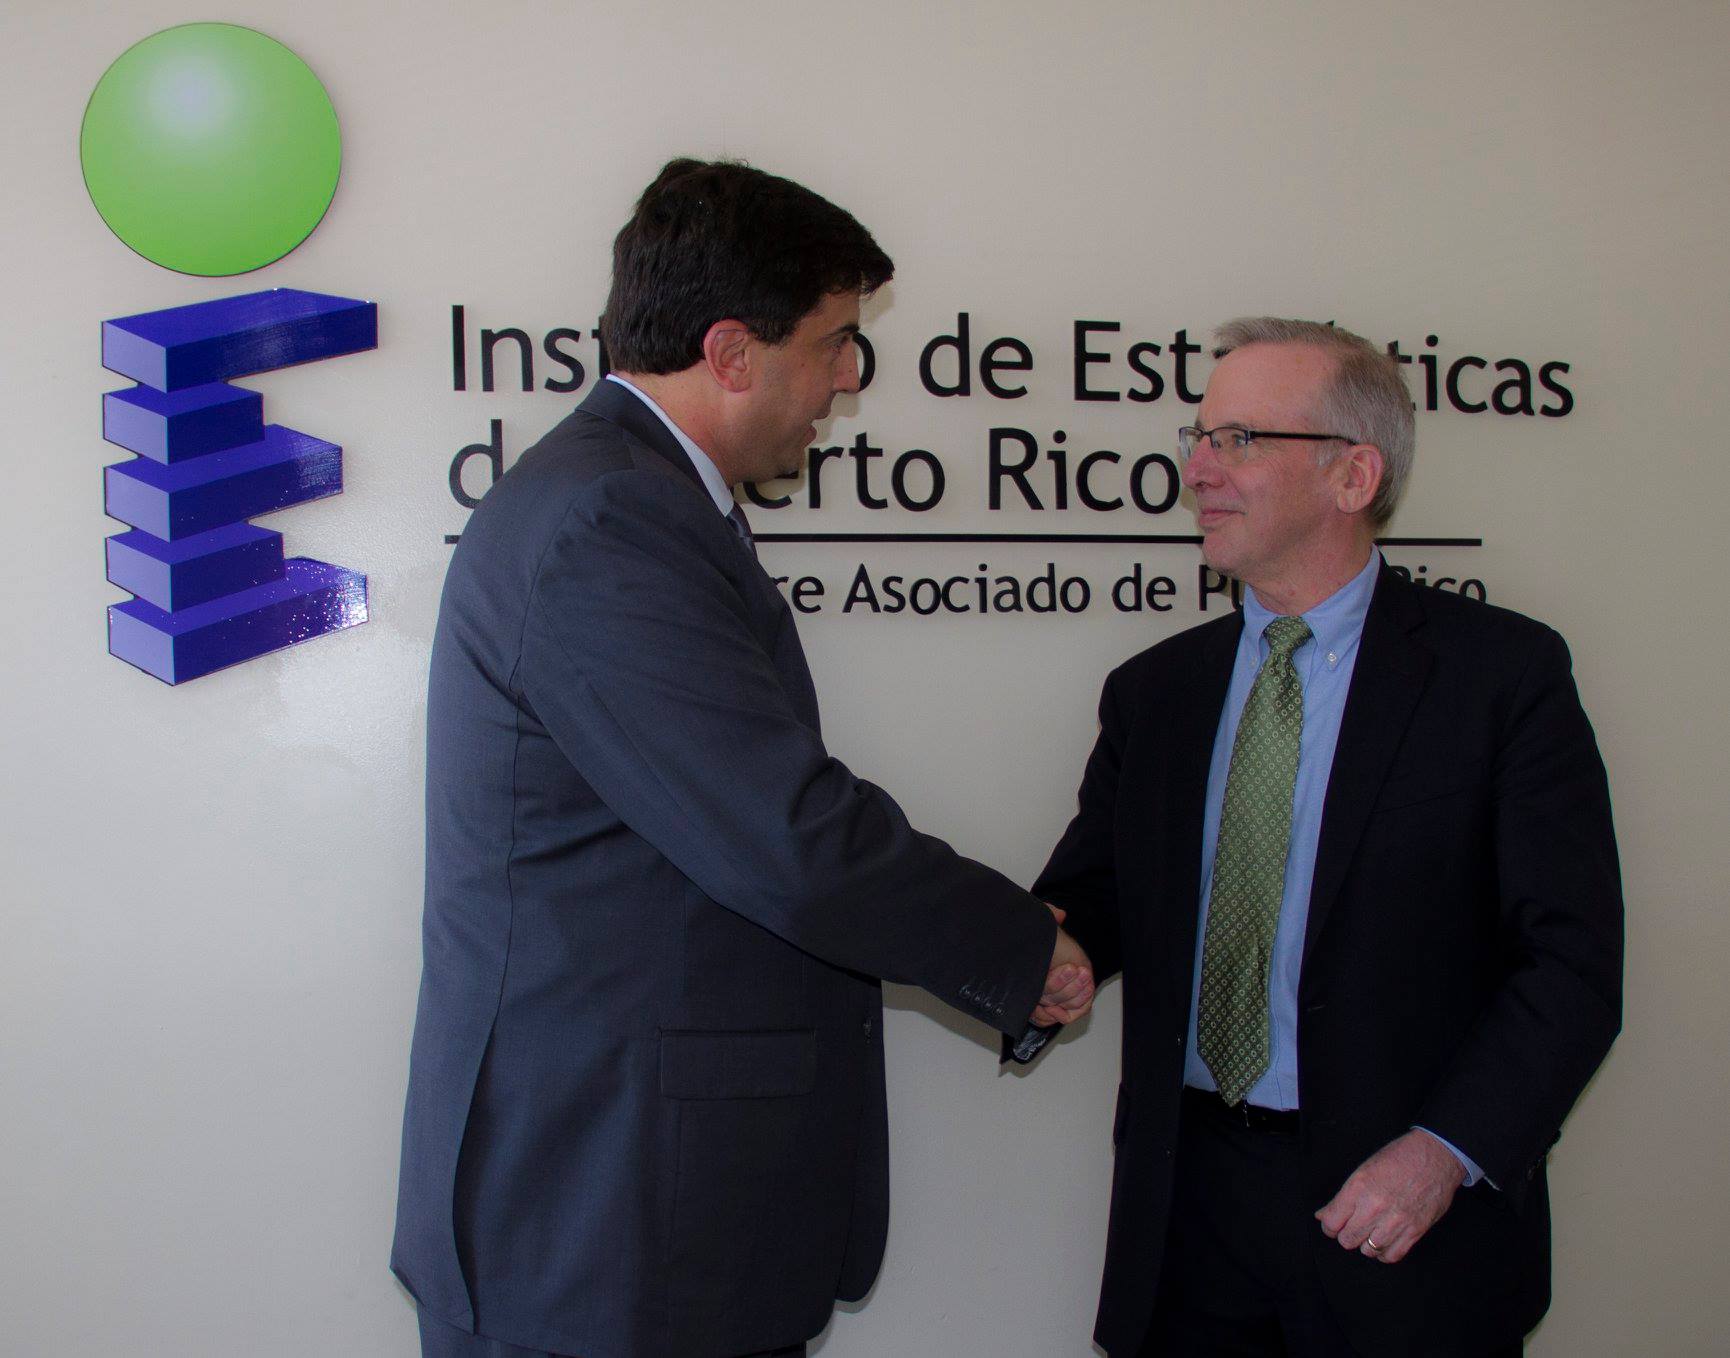 The controversy over the Puerto Rico Institute of Statistics, in context